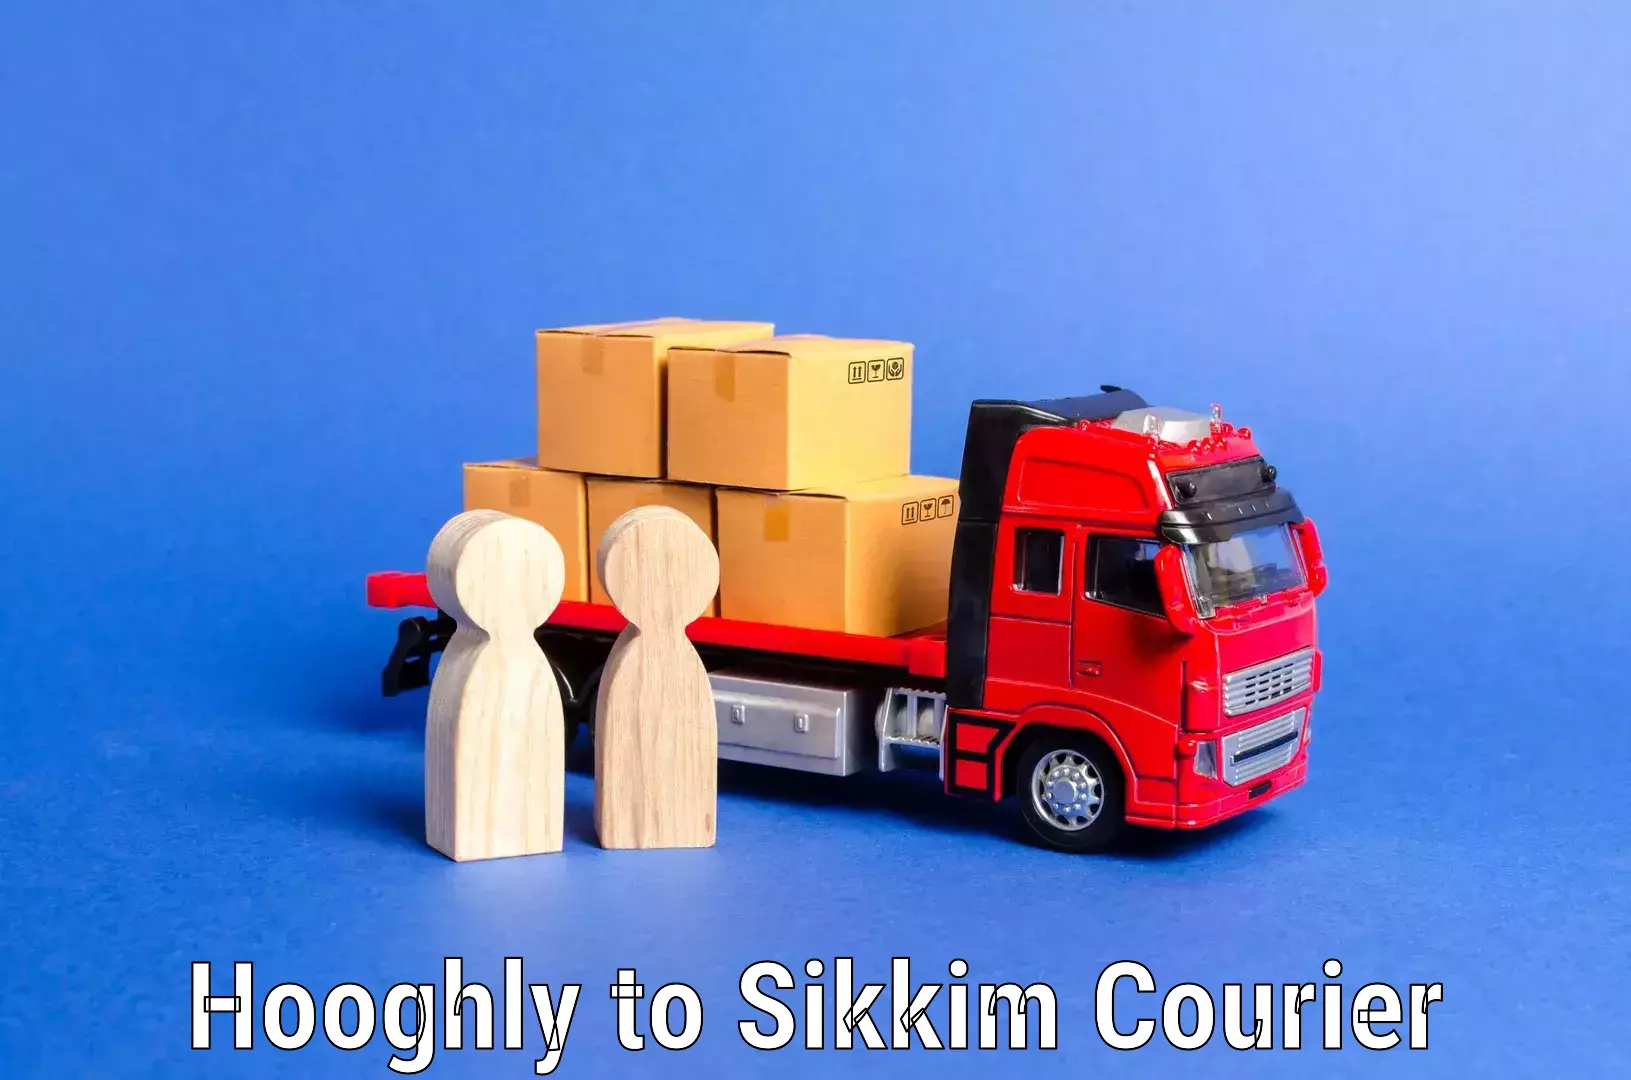 Household moving experts Hooghly to Sikkim